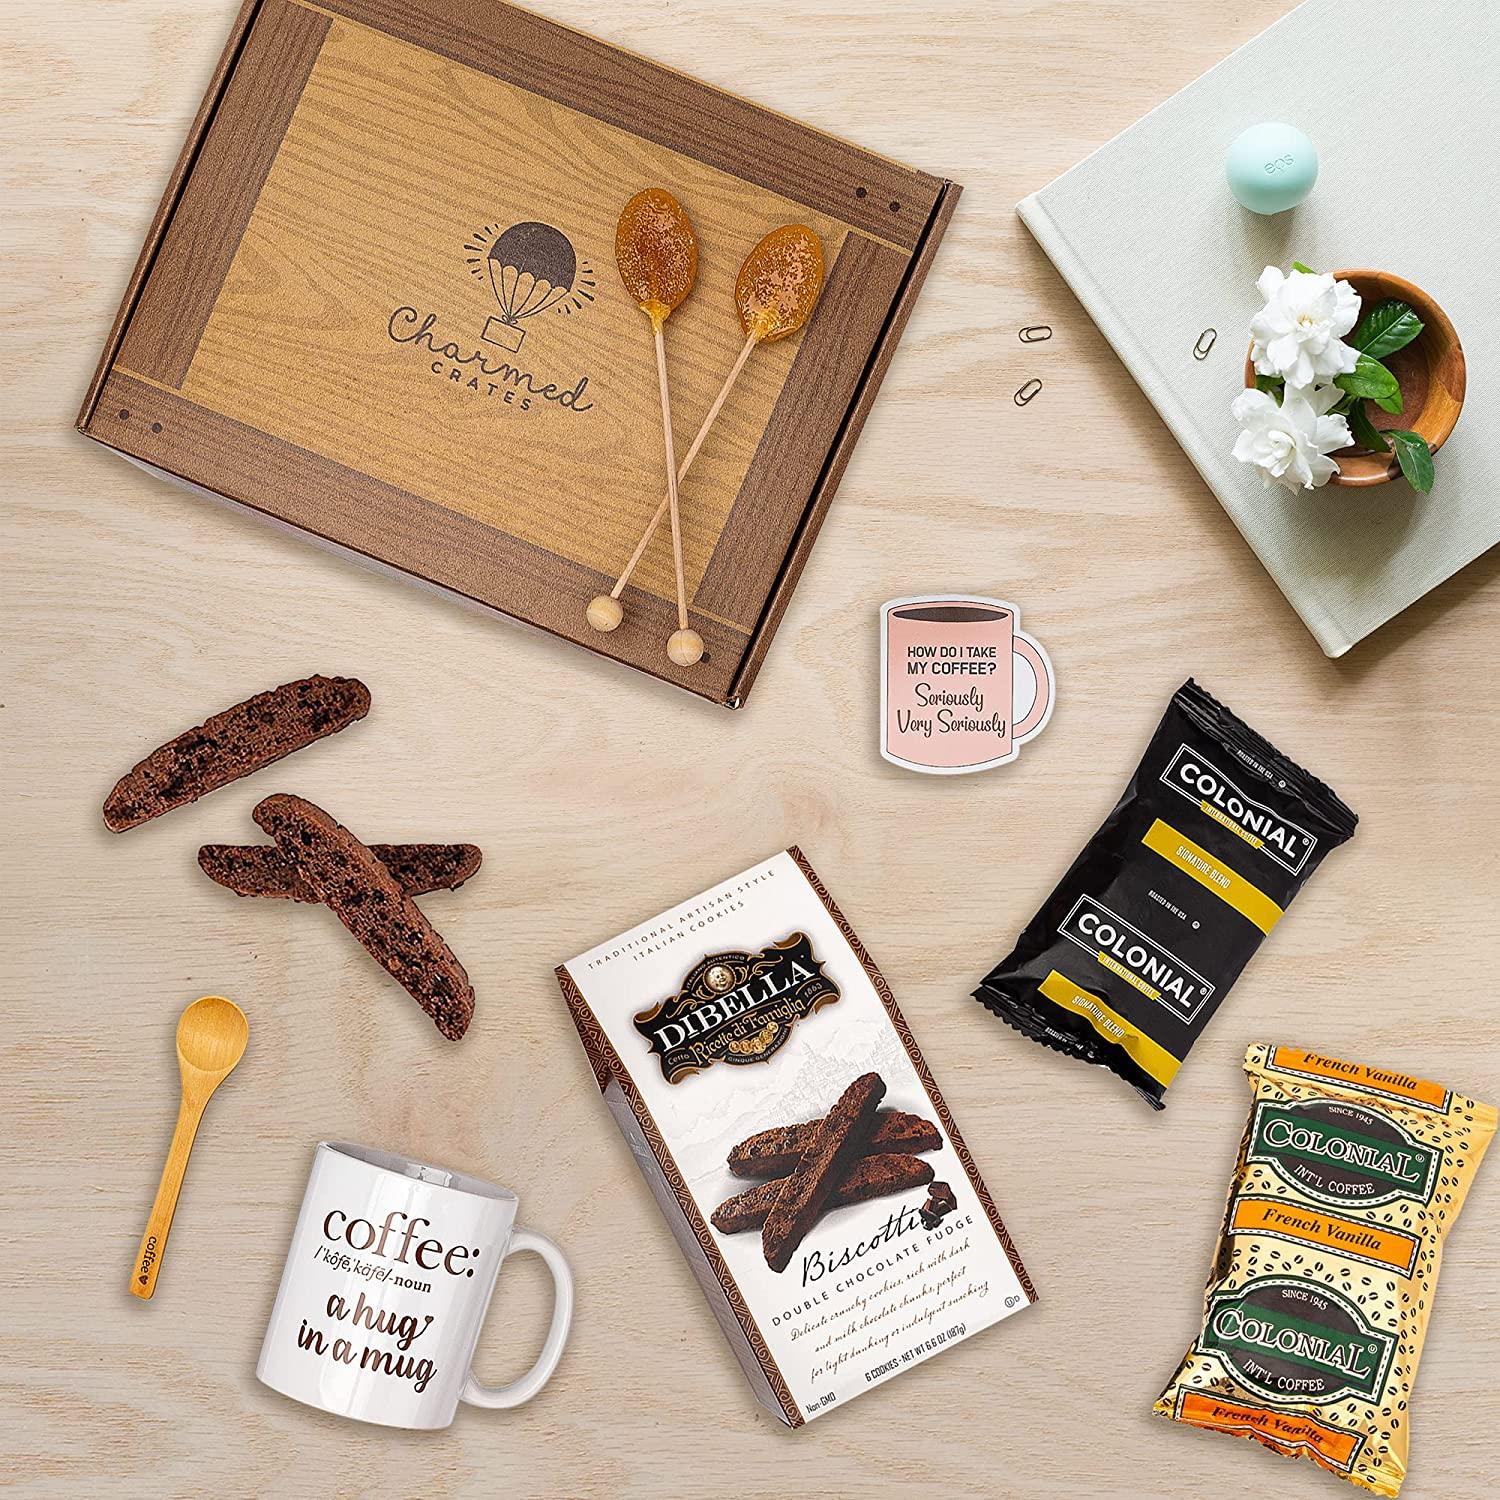 Coffee Lover Gifts